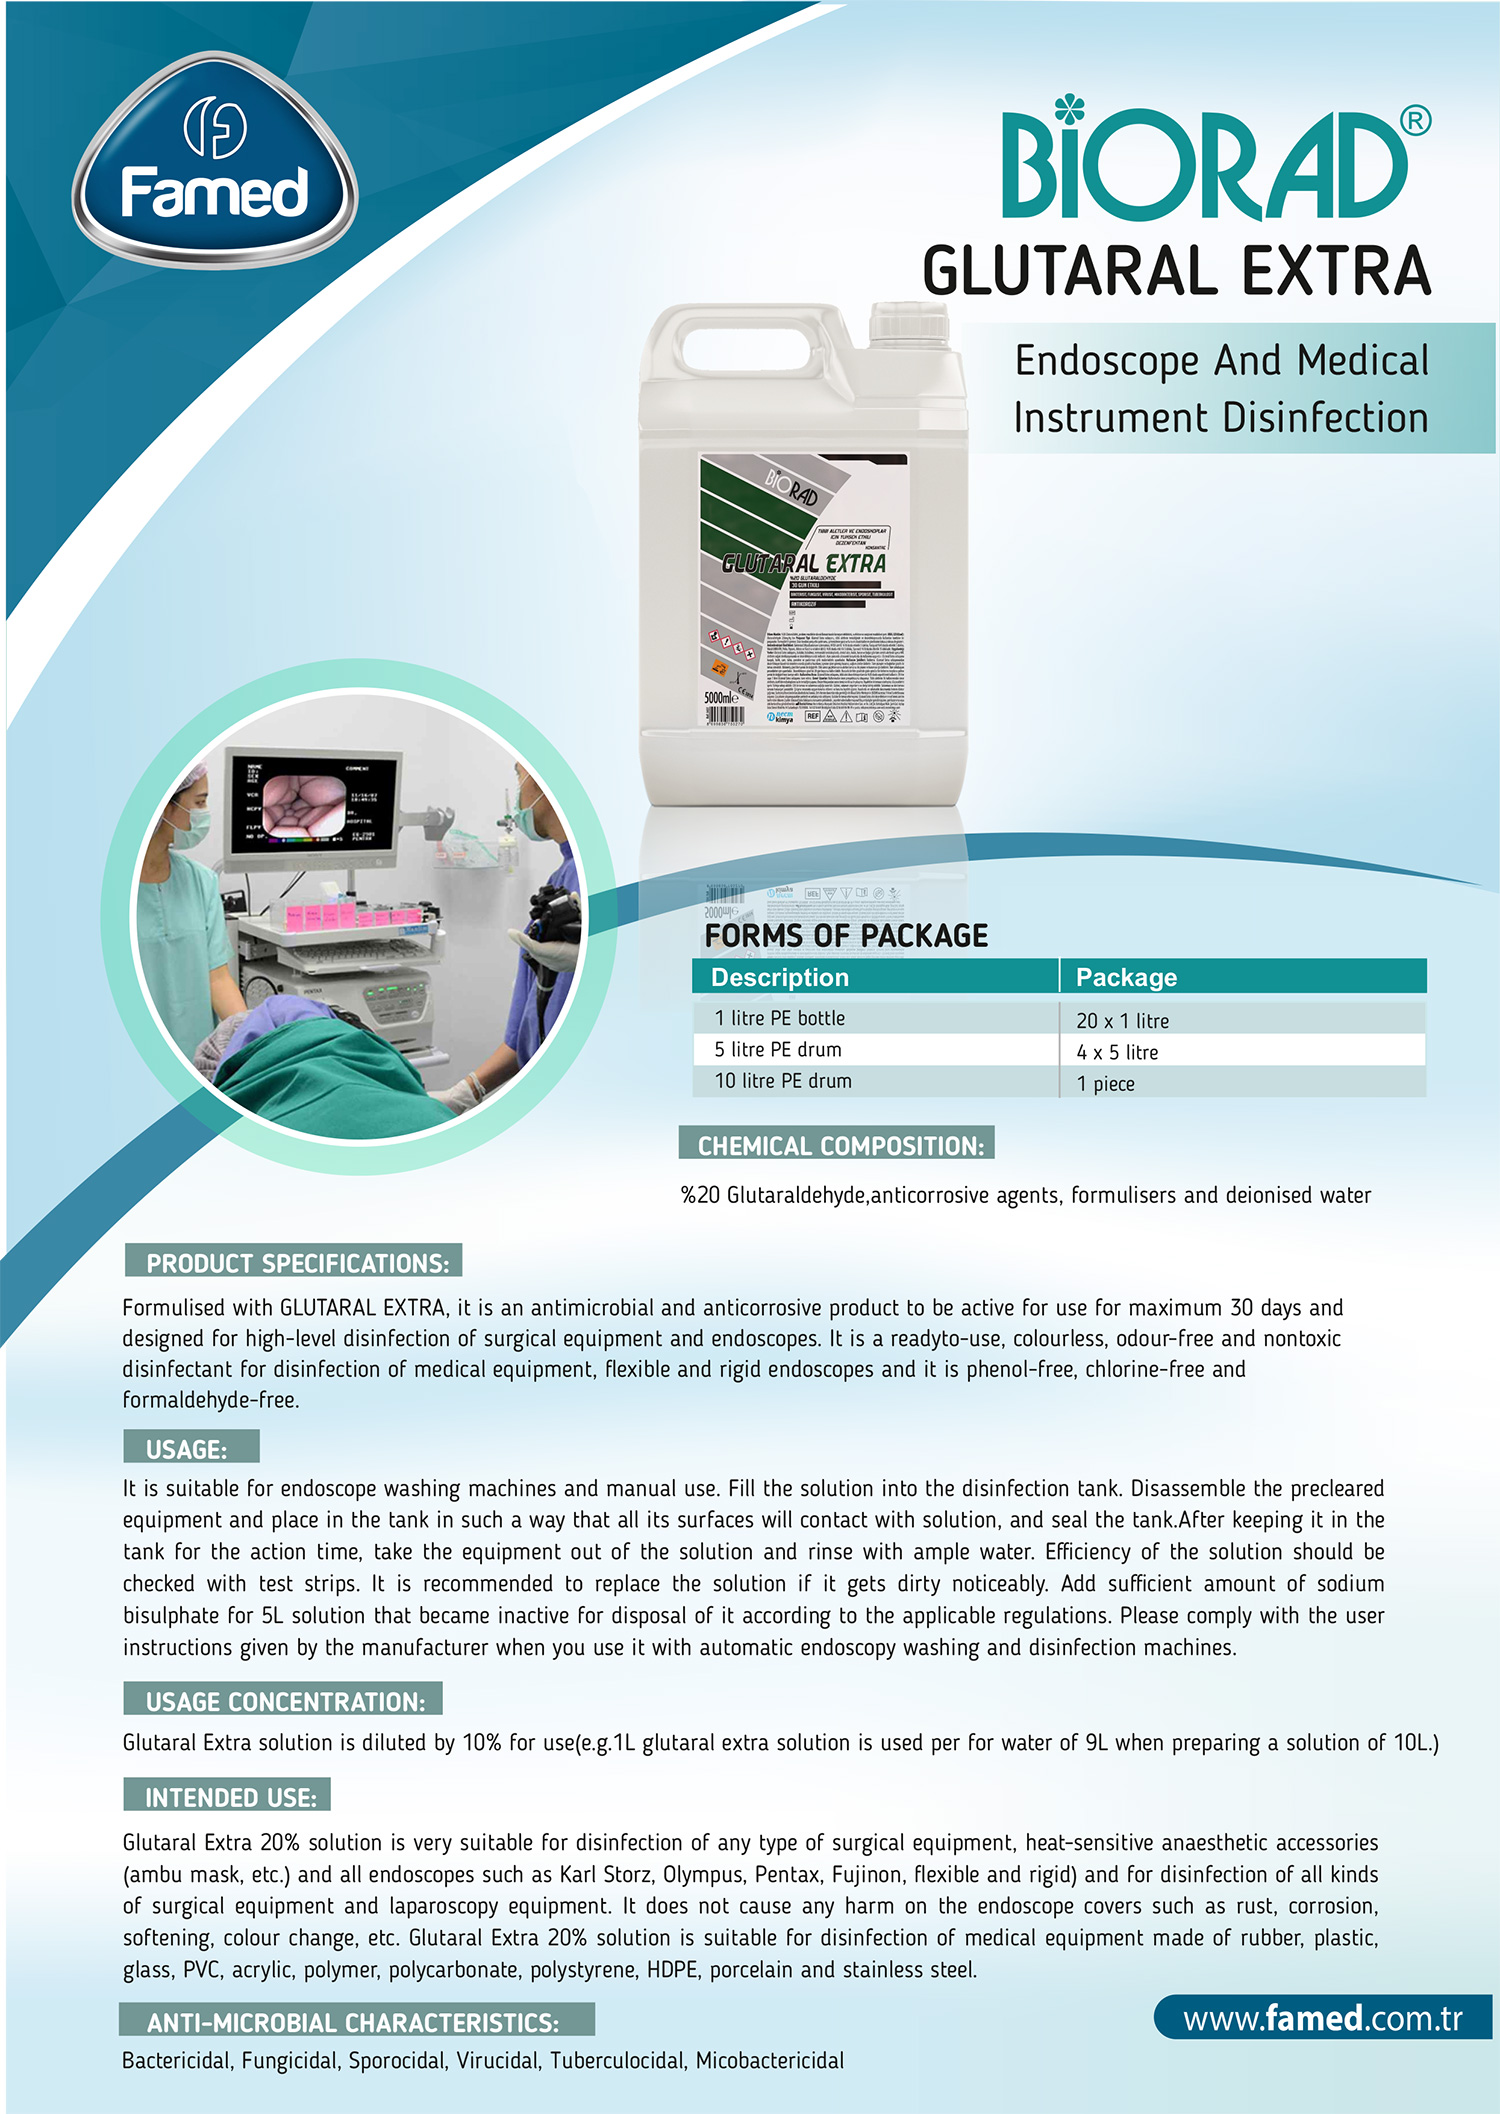 Glutaral Extra Endoscope And Medical Instrument Disinfection